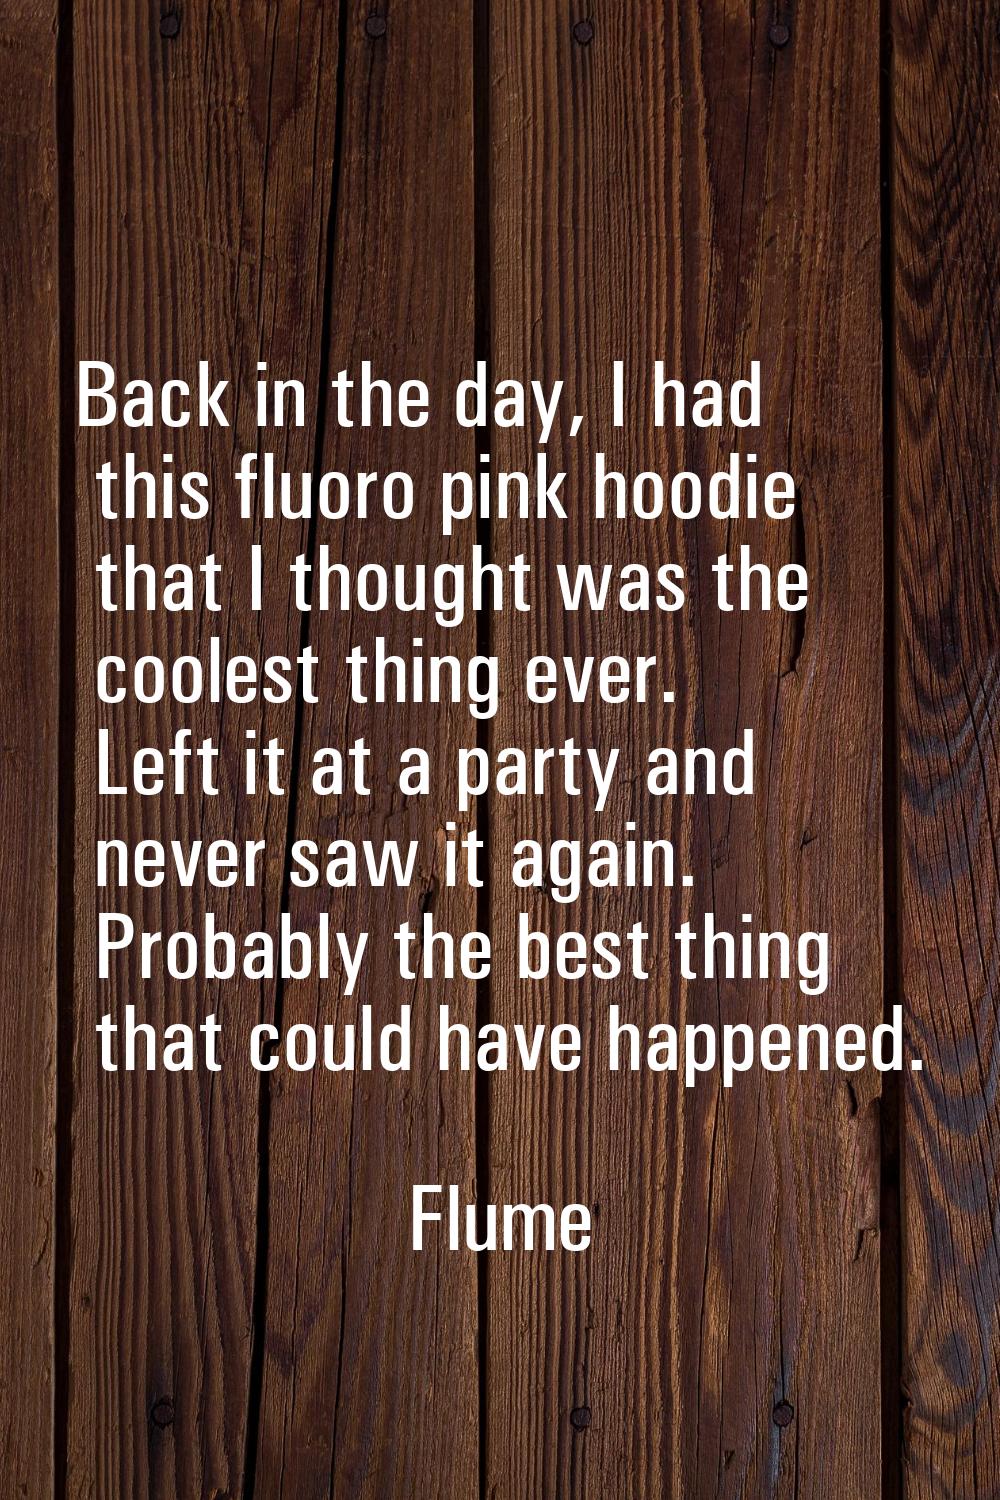 Back in the day, I had this fluoro pink hoodie that I thought was the coolest thing ever. Left it a